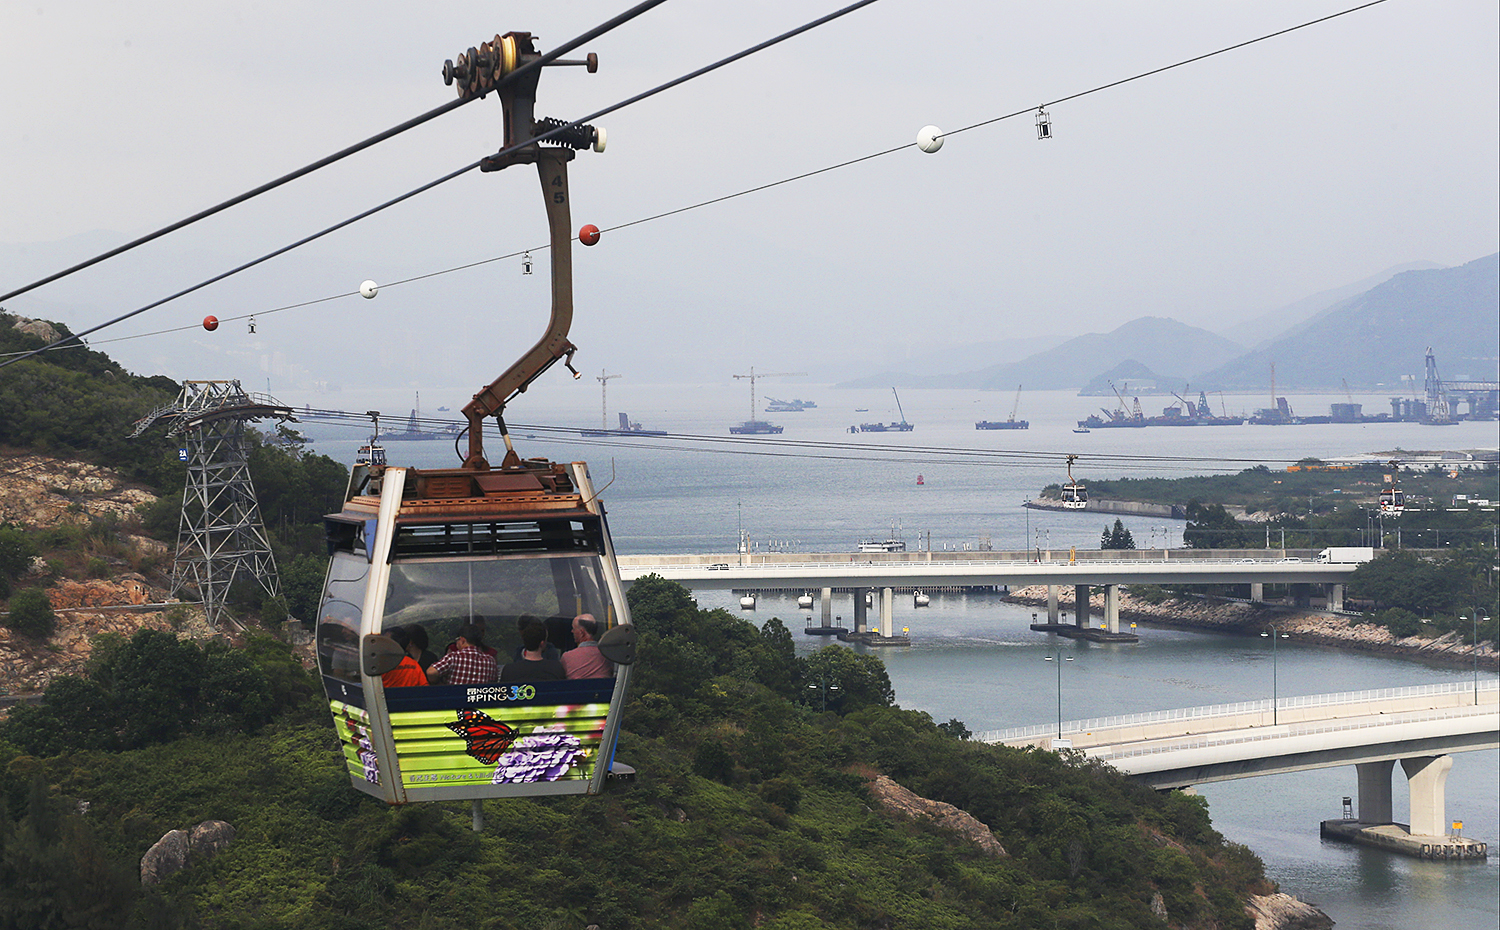 Stella Kwan, managing director of Ngong Ping 360, said maintenance days and weather conditions are two of the factors affecting visitor numbers. Photo: Felix Wong